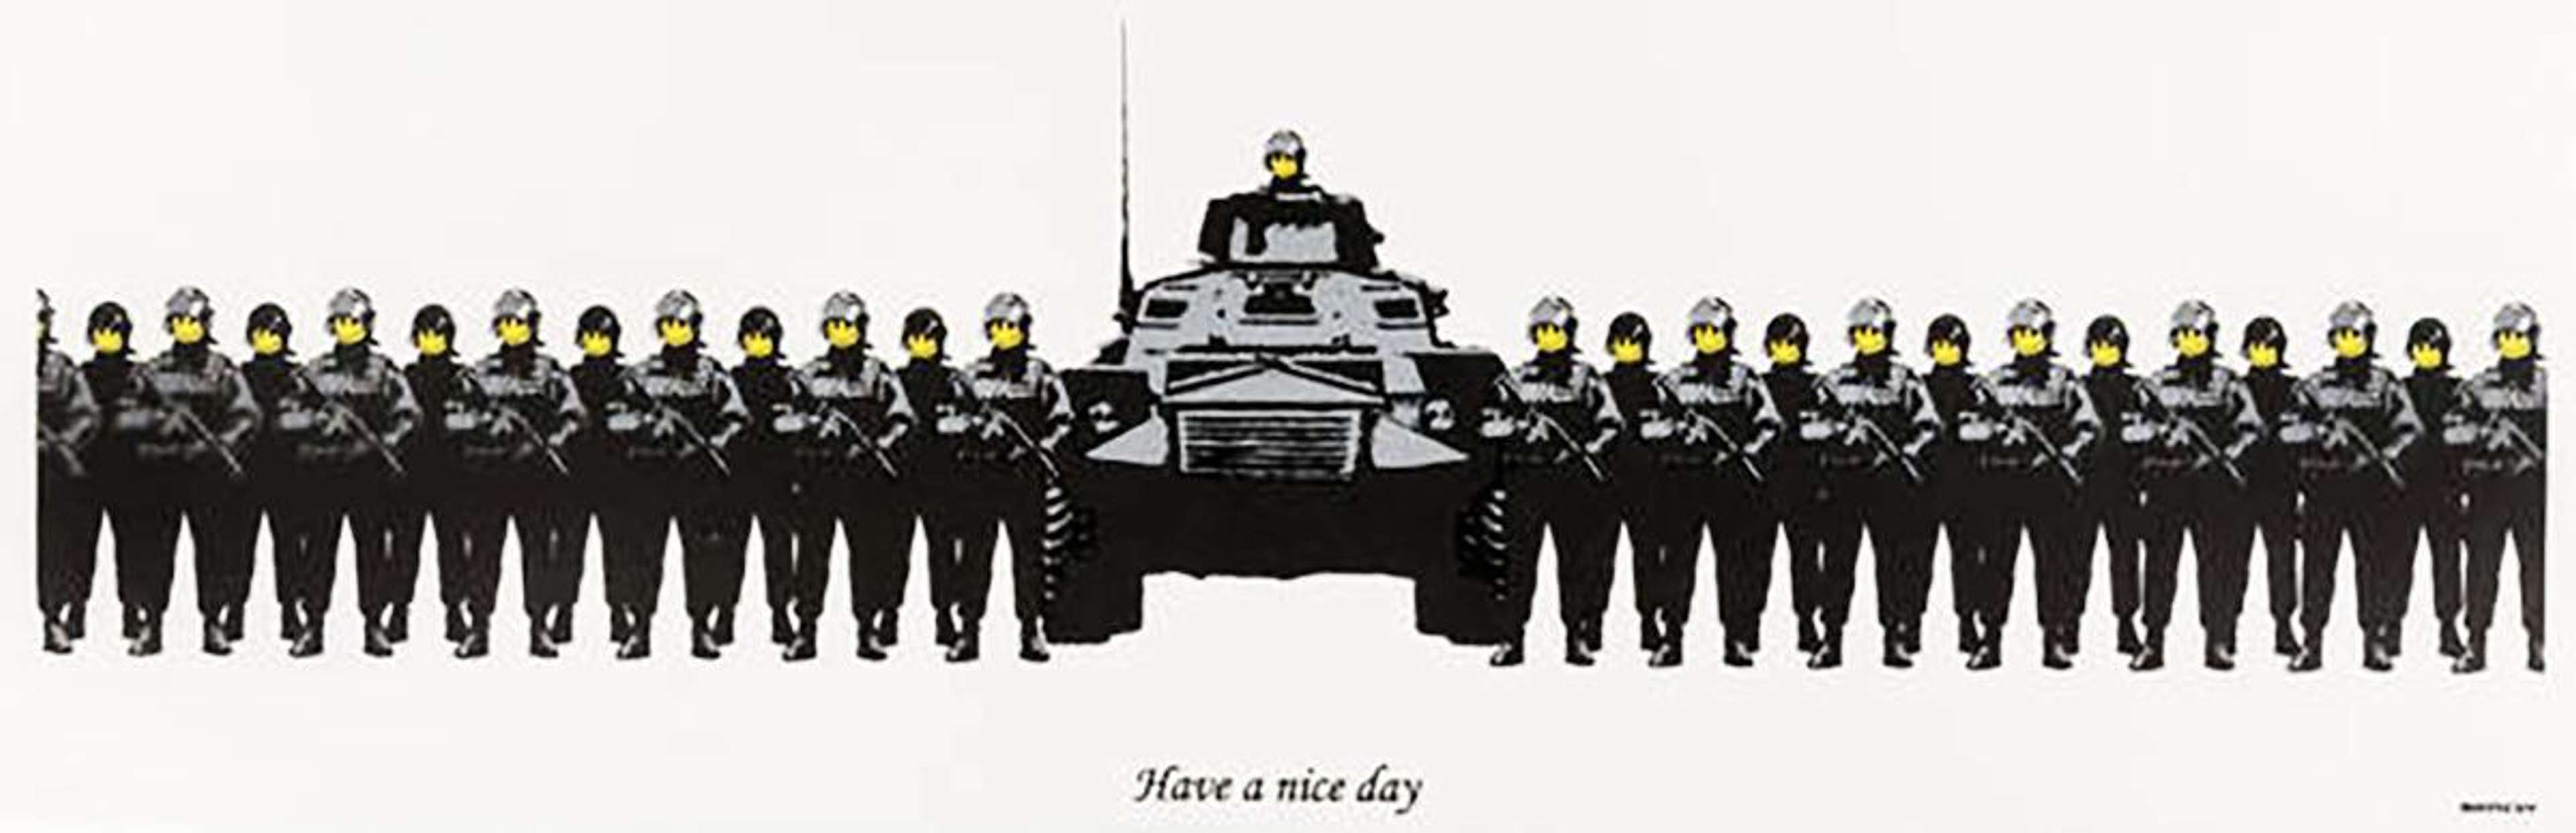 Have A Nice Day (Anarchist Book Fair) - Signed Print